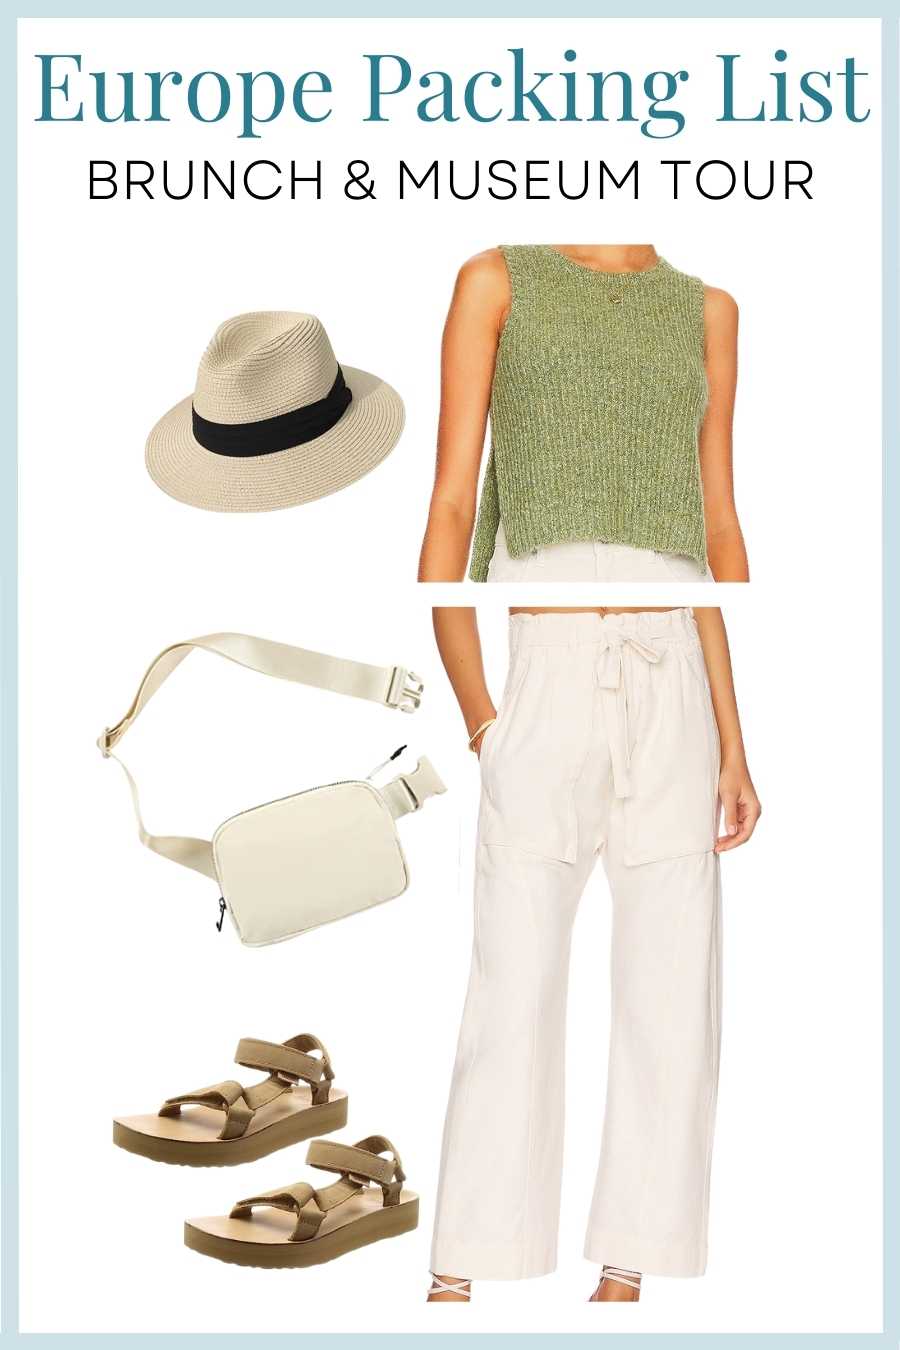 Summer in Europe brunch and museum packing list outfit